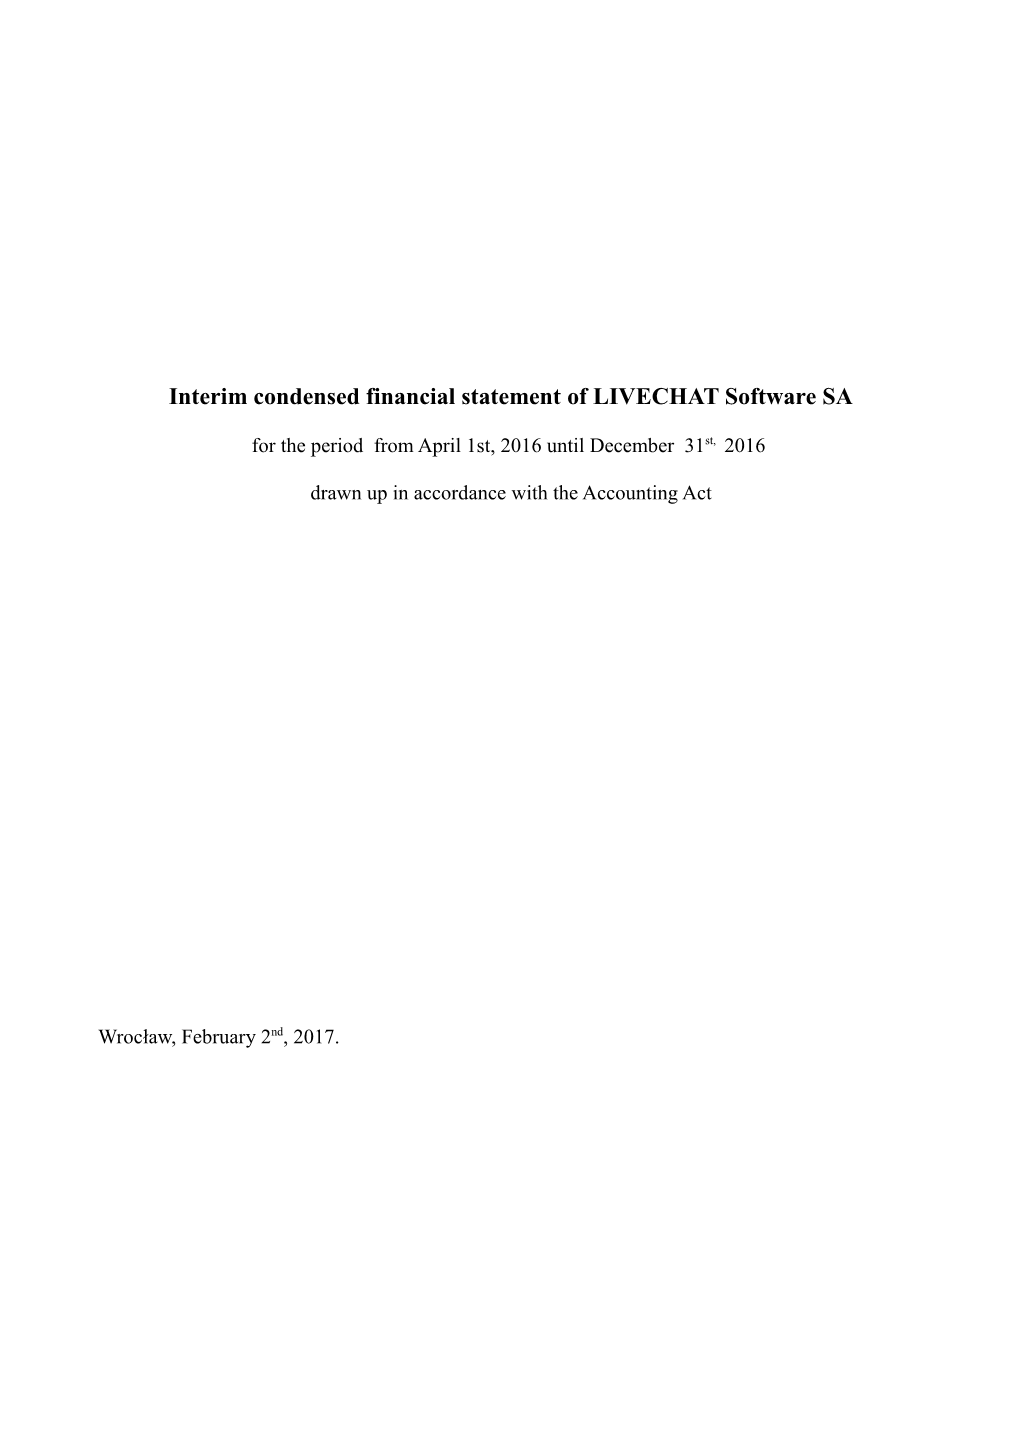 Interim Condensed Financial Statement of LIVECHAT Software SA